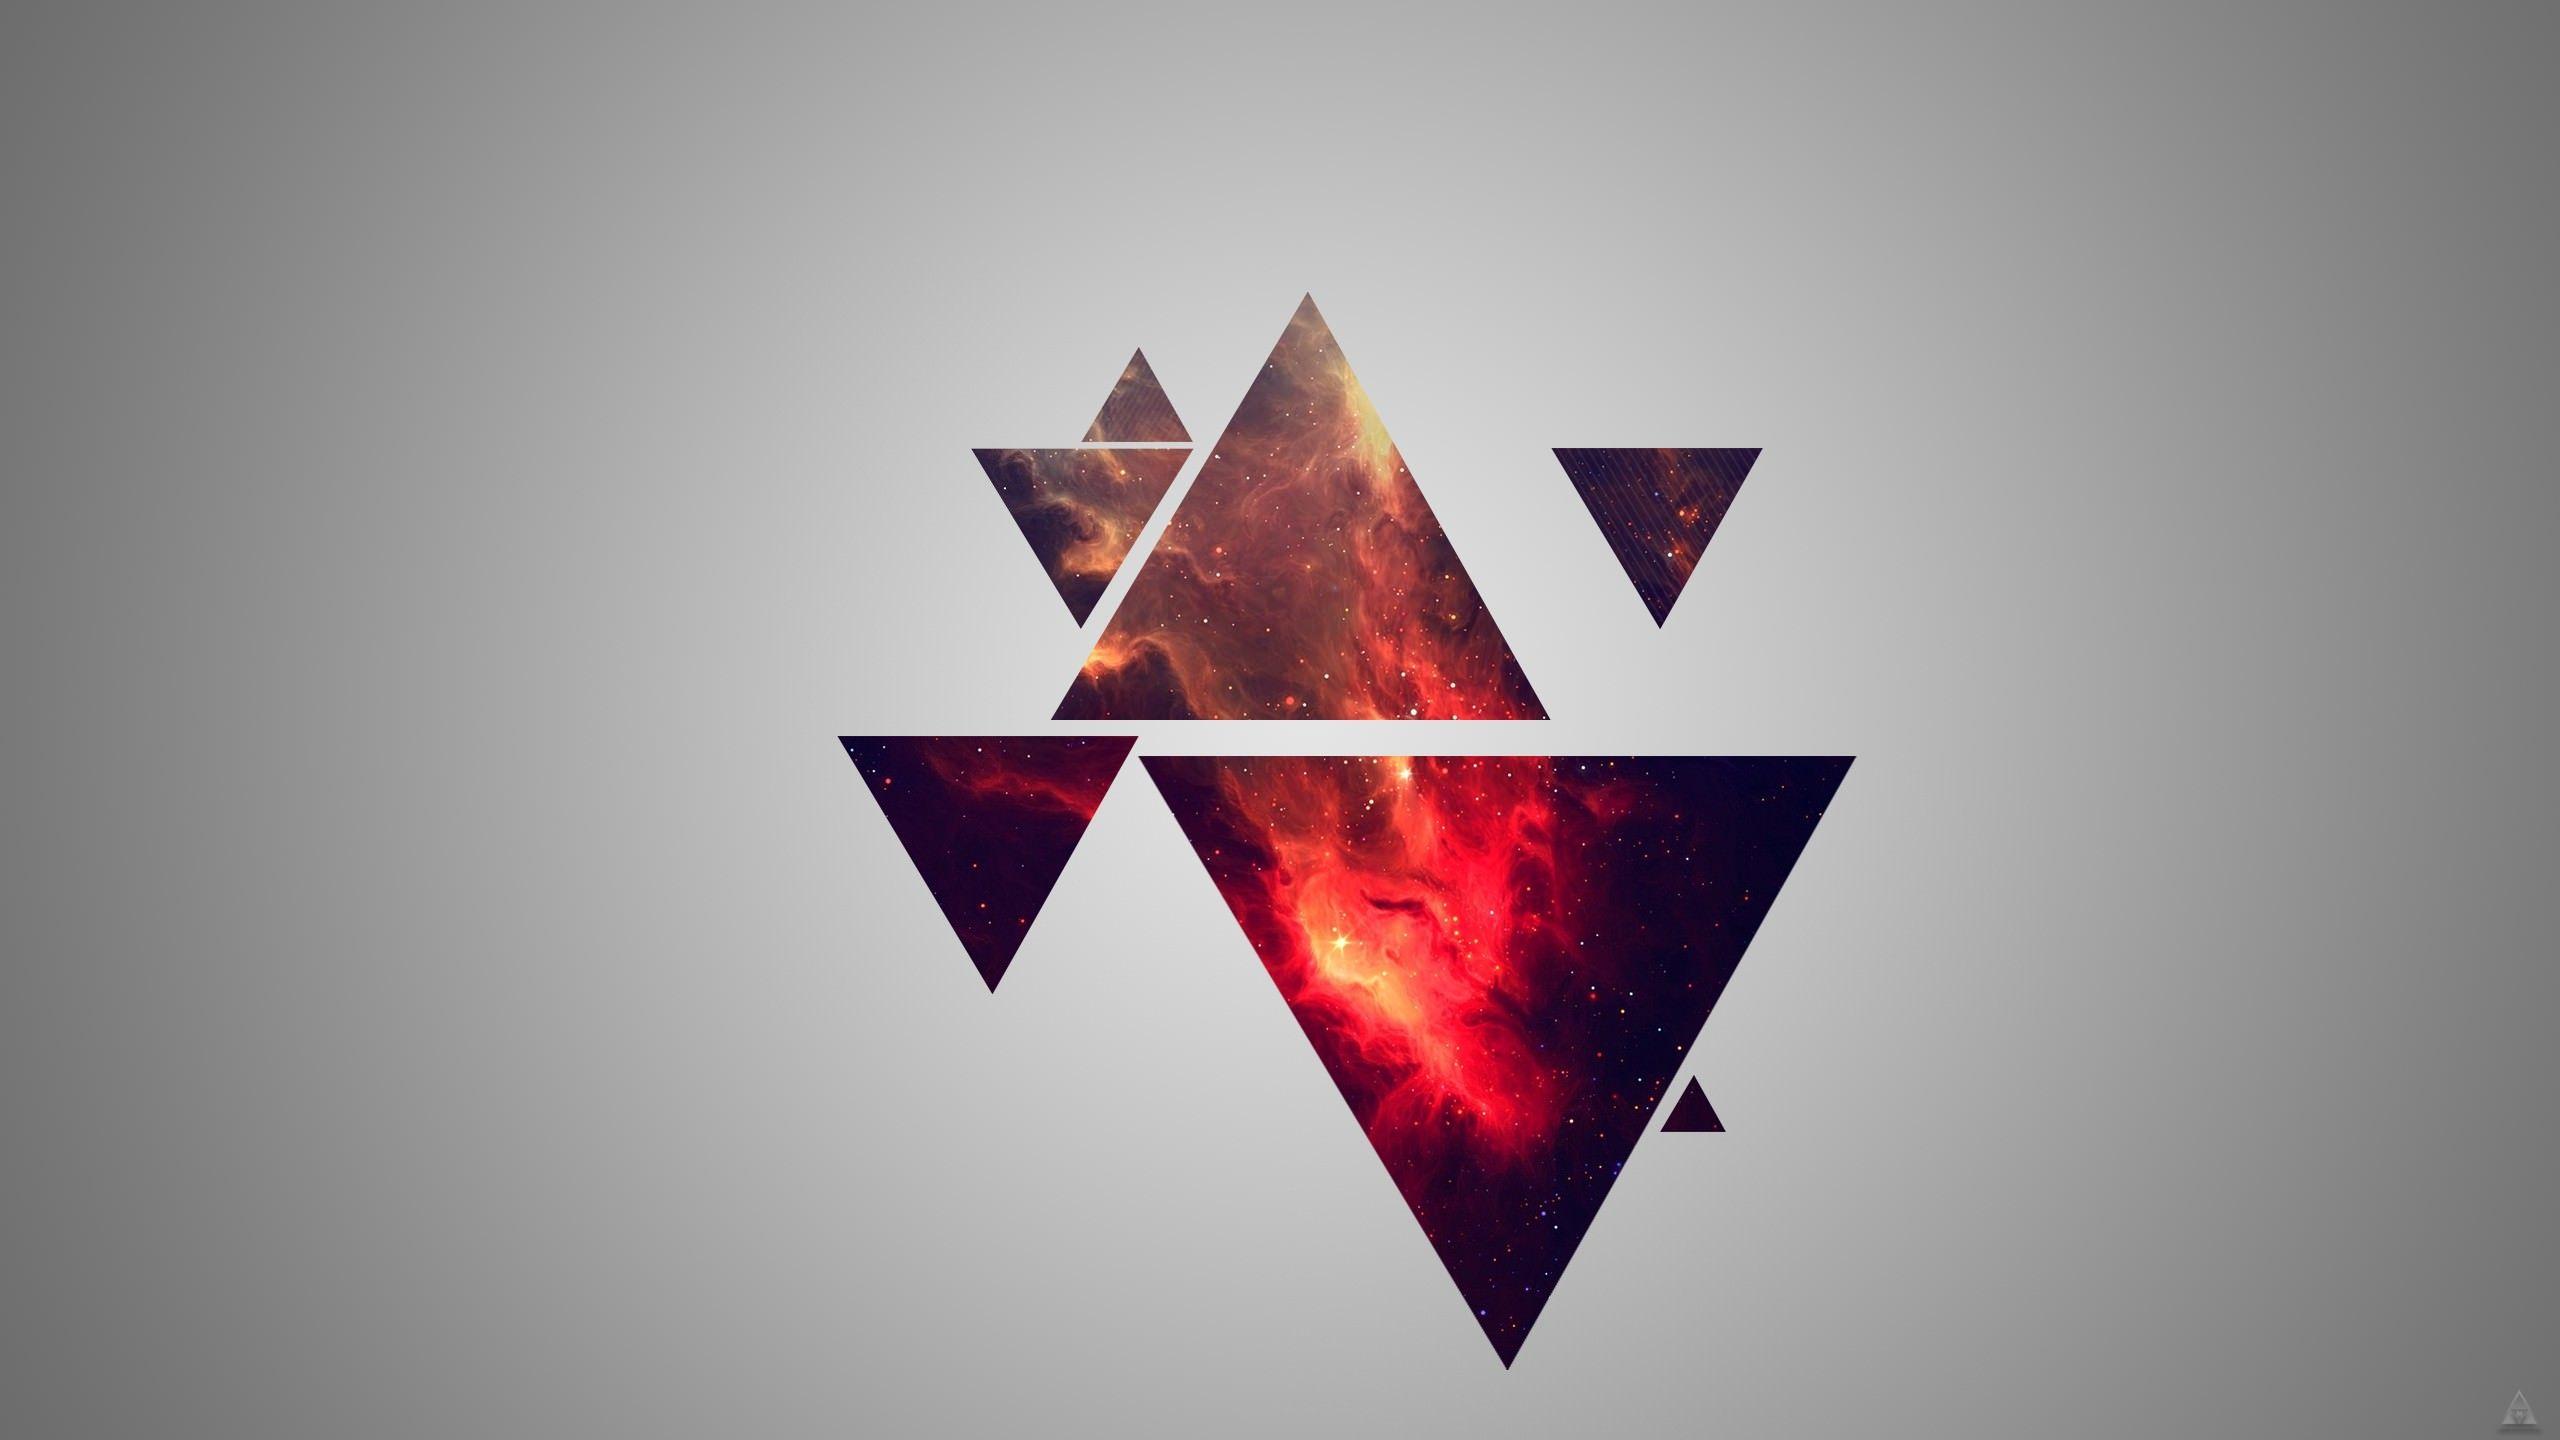 Abstract Hipster Minimalistic Nebulae Wallpaper